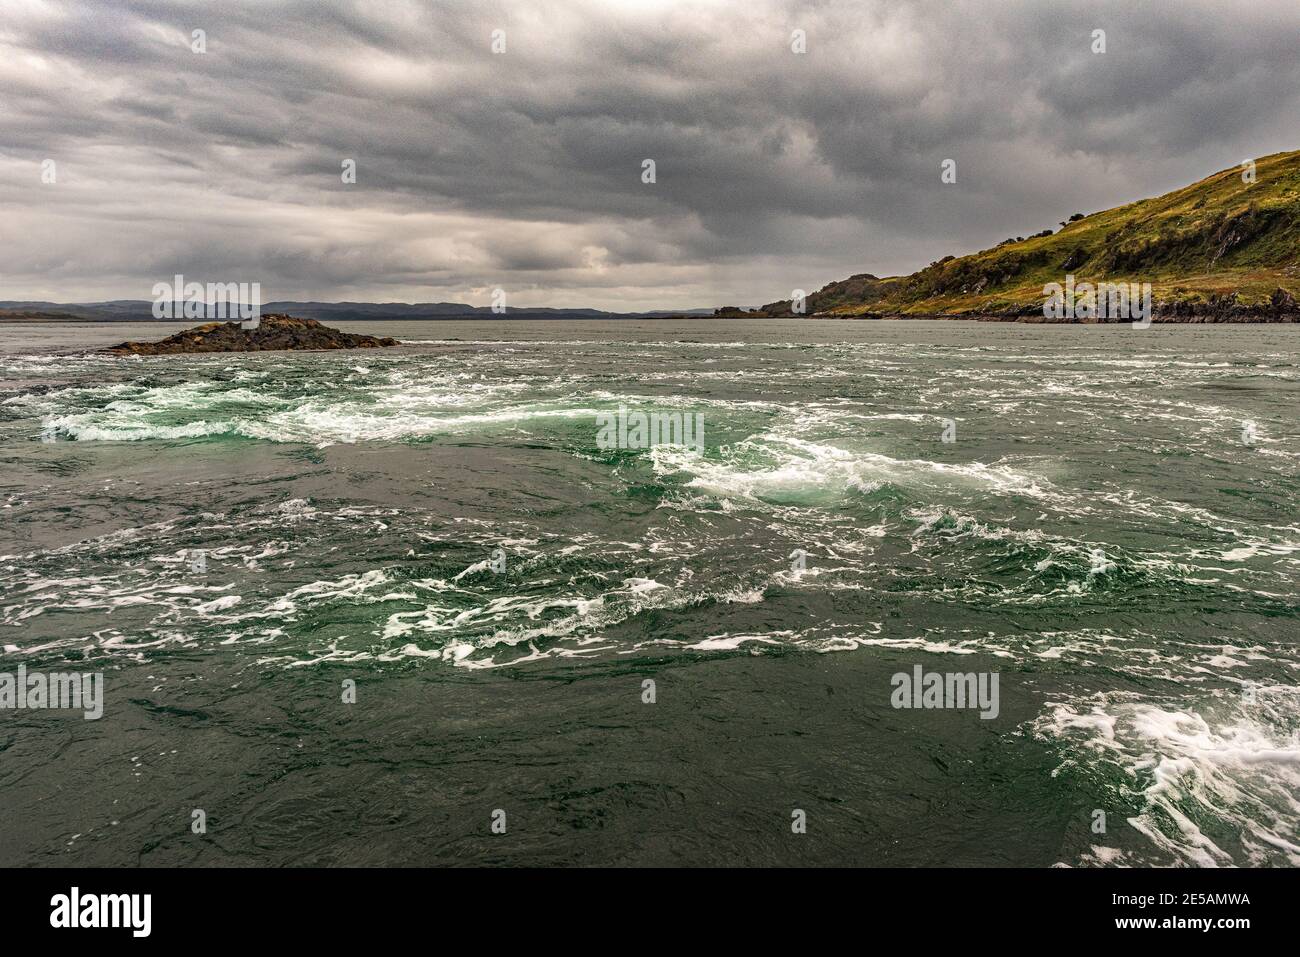 Gulf of Corryvreckan / Straits of Corryvreckan is a stretch of very turbulent water between the islands of Scarba & Jura on the West Coast of Scotland Stock Photo